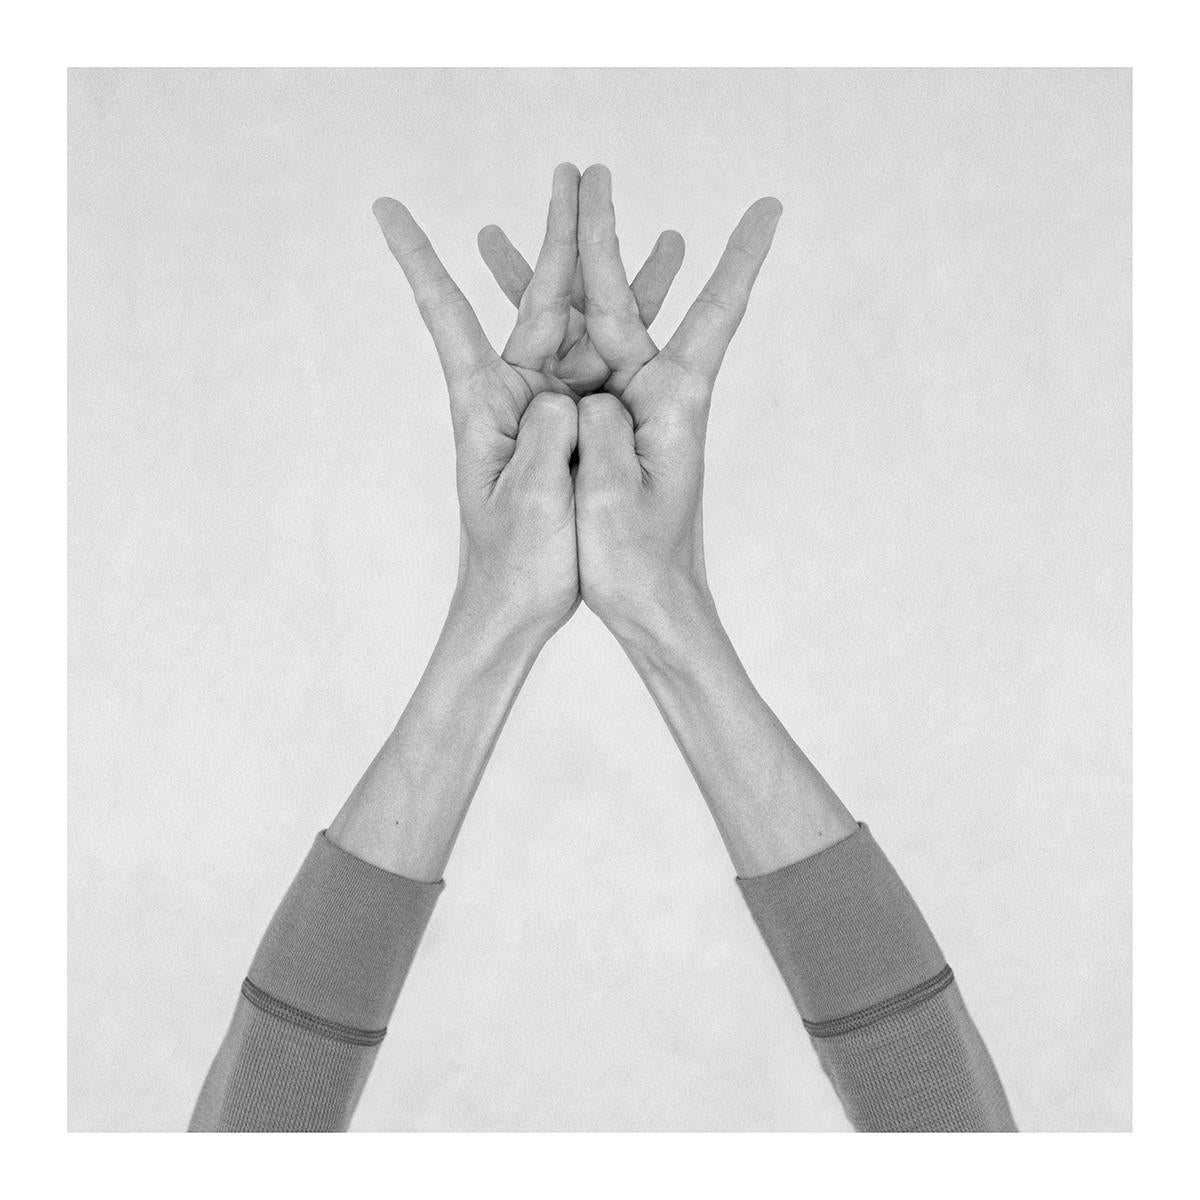 Untitled XXVI. From the Series Chiromorphose. Hands. Black & White Photography